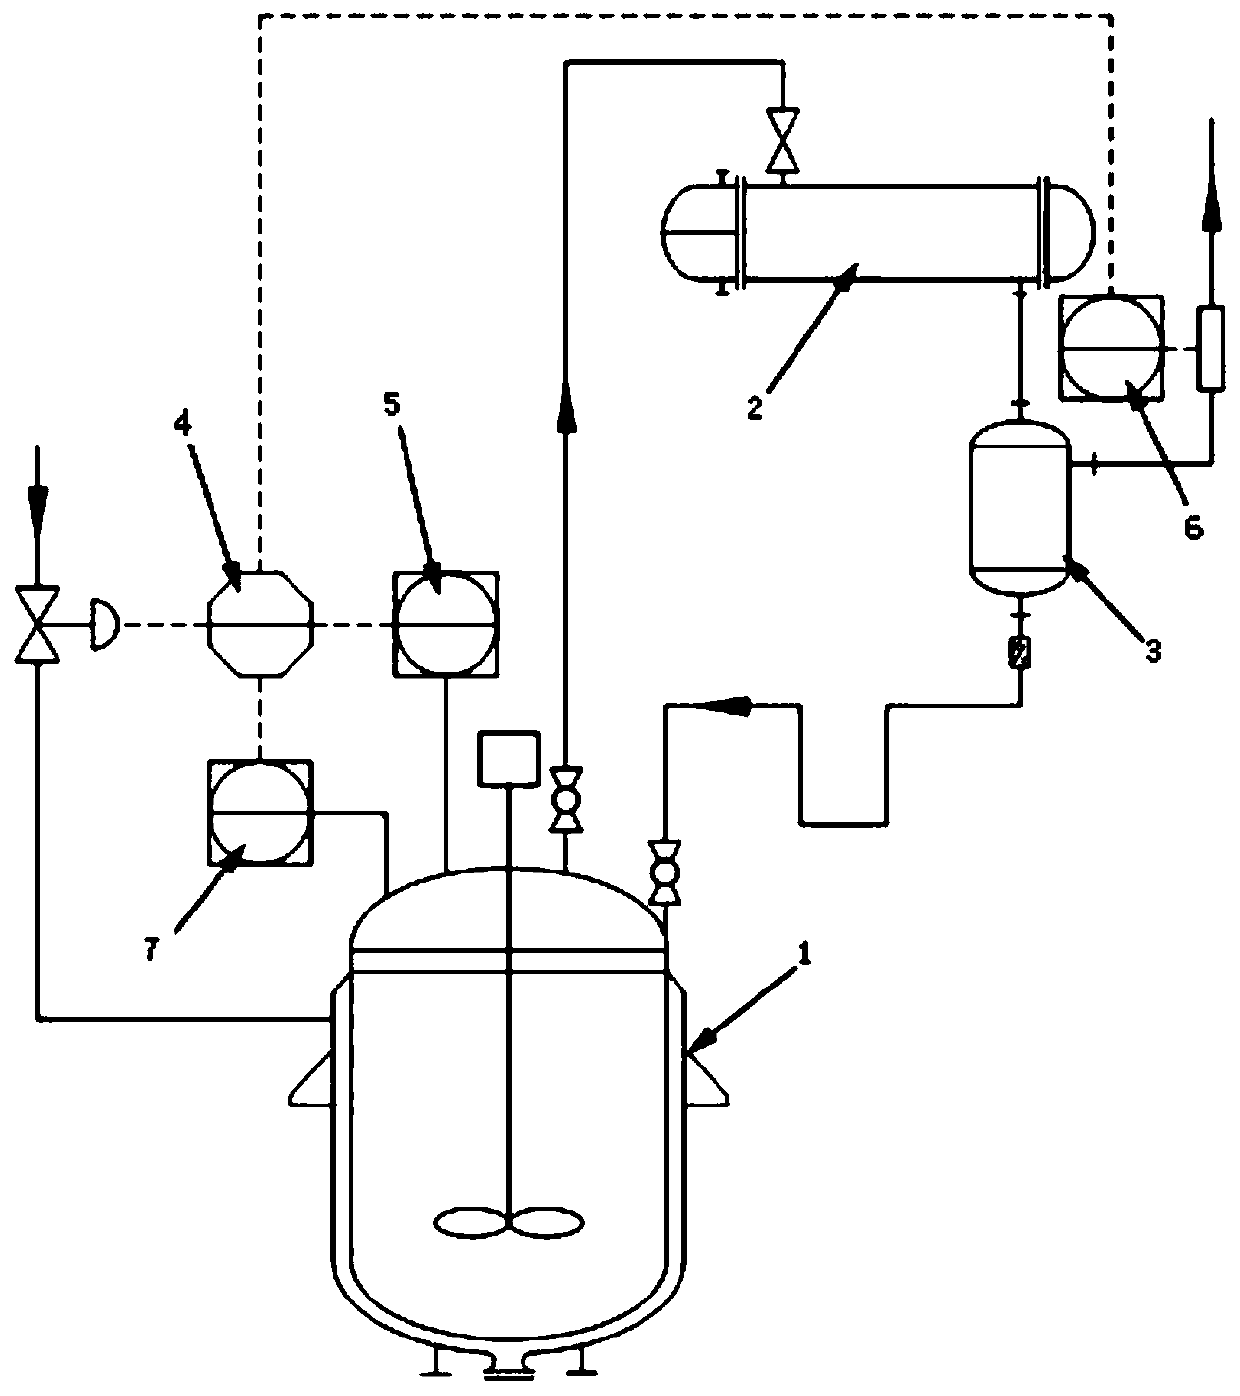 Automatic control method for acyl chloride synthesis reaction